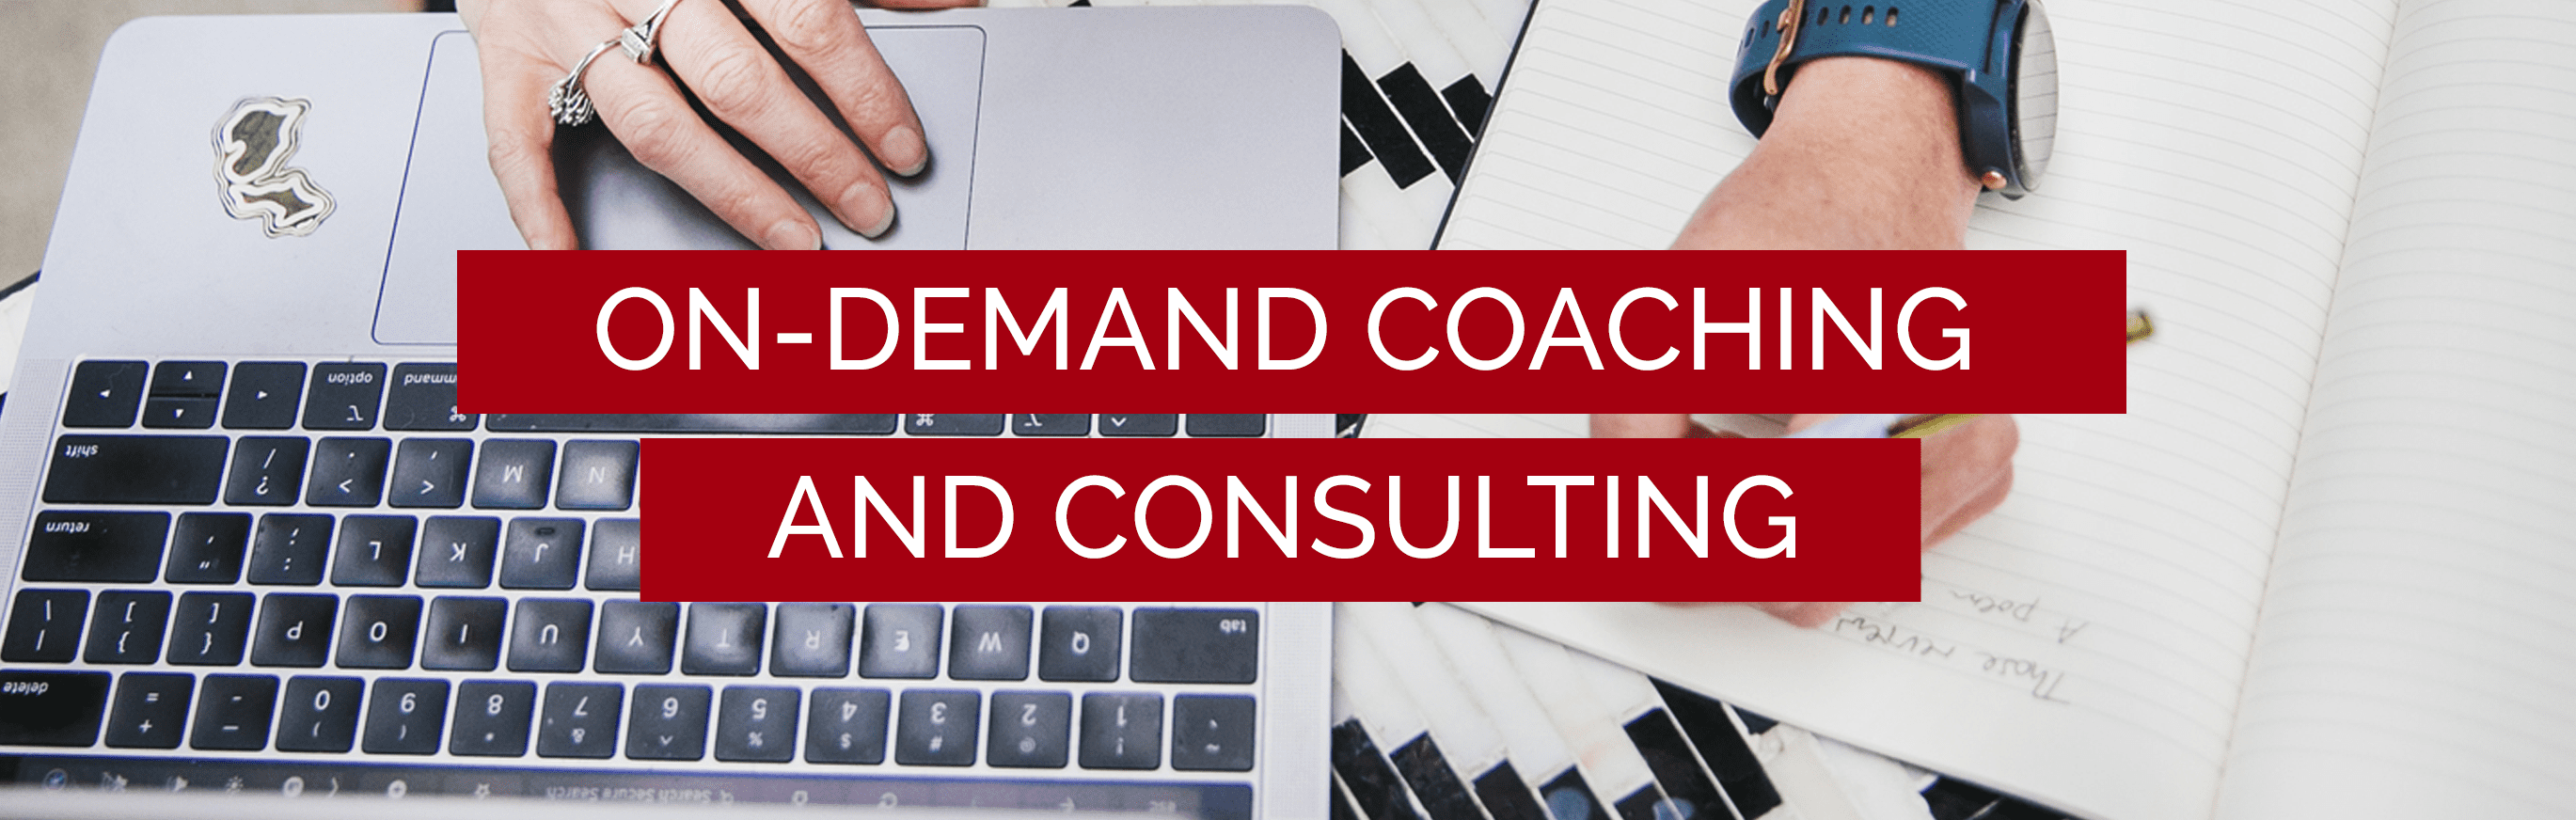 on demand coaching and consulting